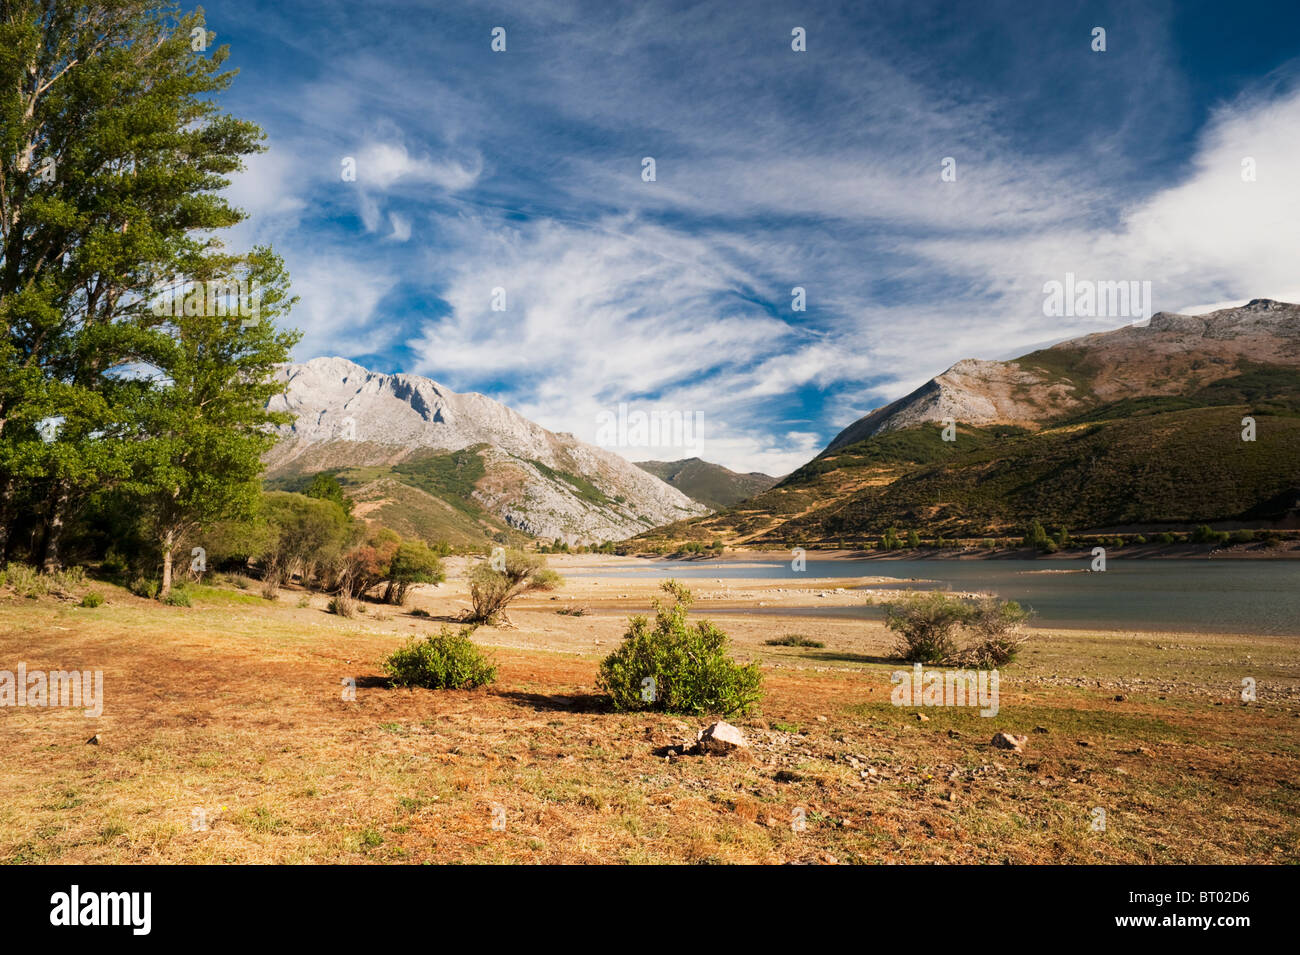 The partly dry Camporedondo Reservoir in the Palentine Mountain range of northern Spain Stock Photo